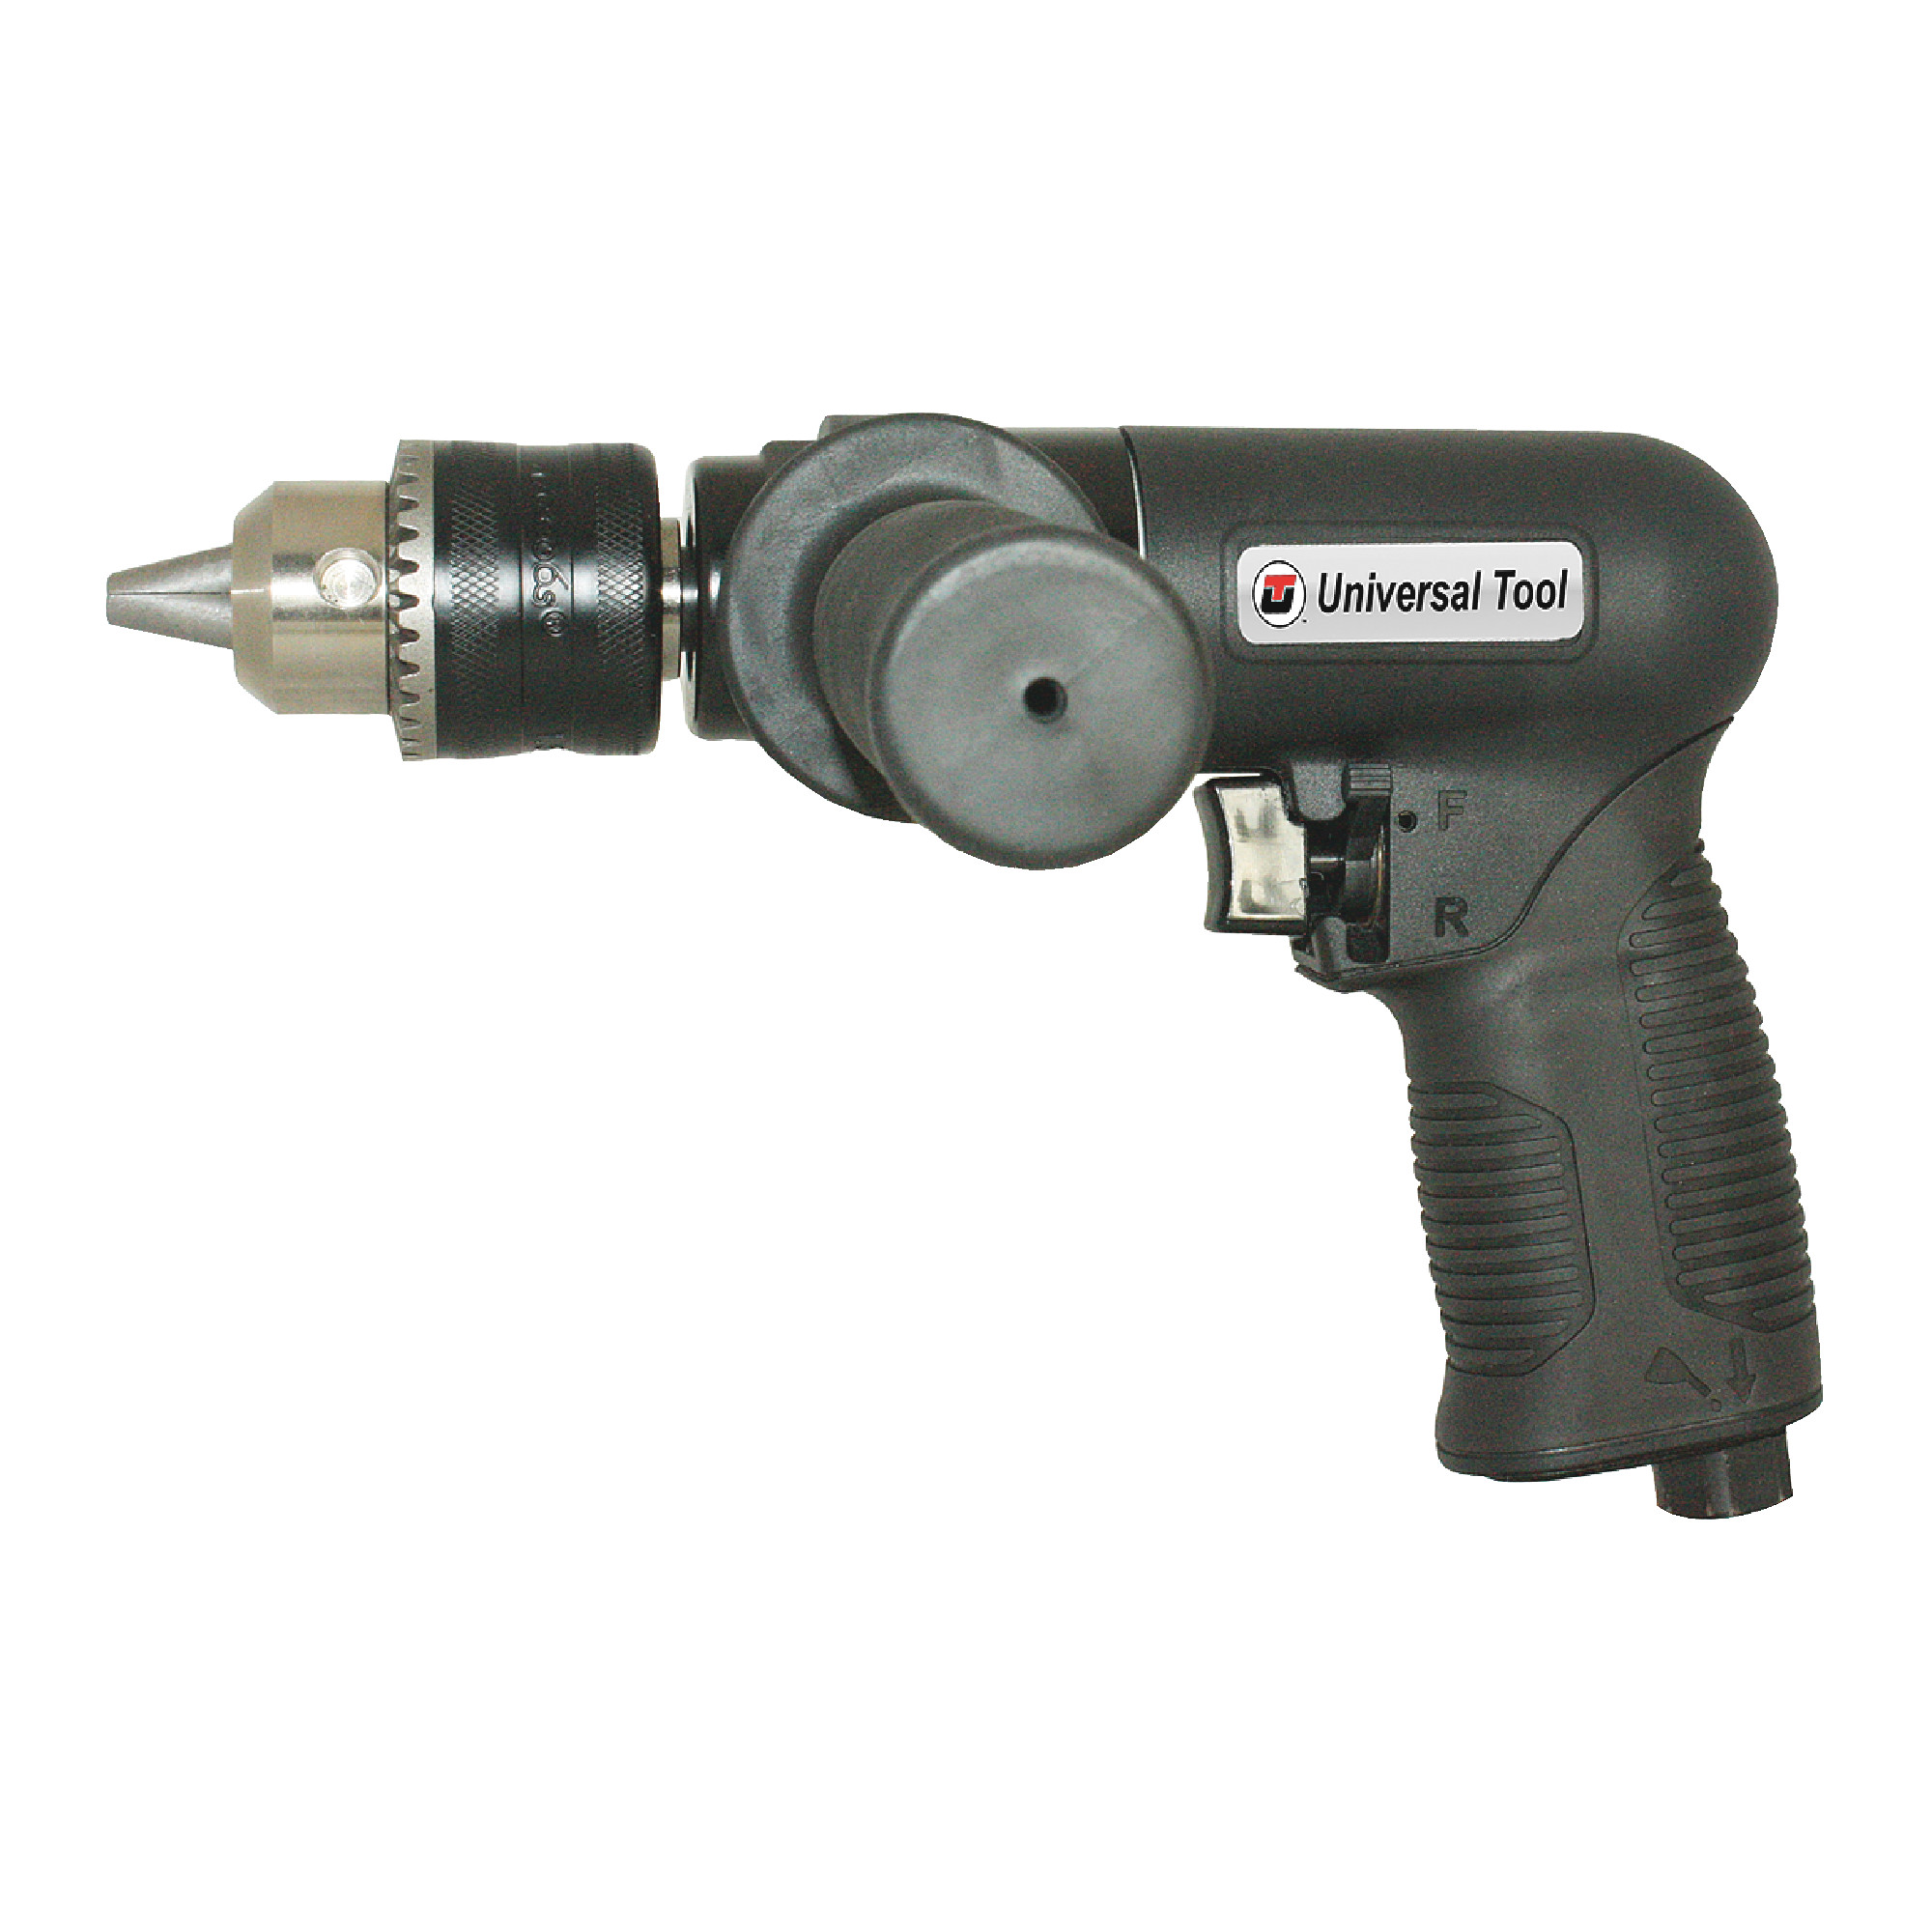 1/2" Reversible Drill